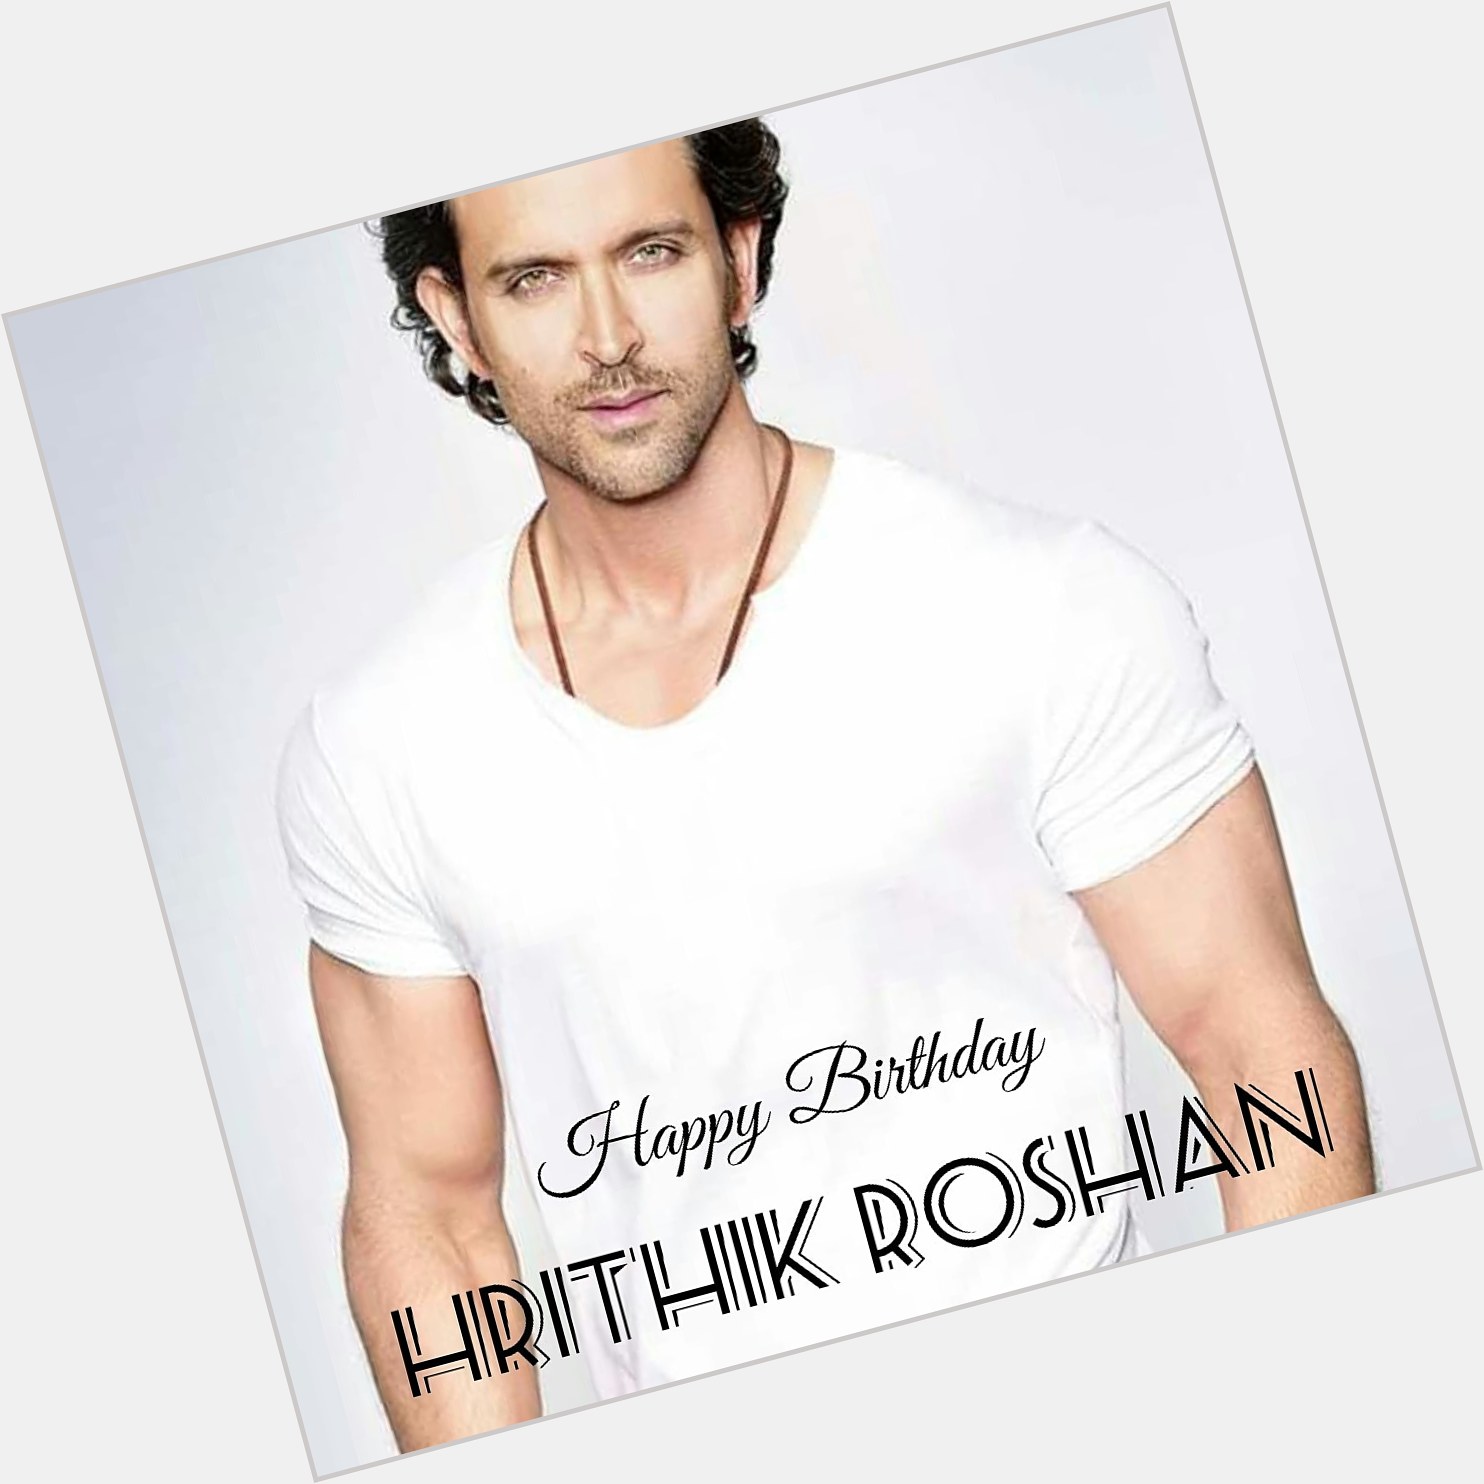 Sm Talent Management 
Wishing a Verry Happy Birthday to
Hrithik Roshan. 
God bless you always. 